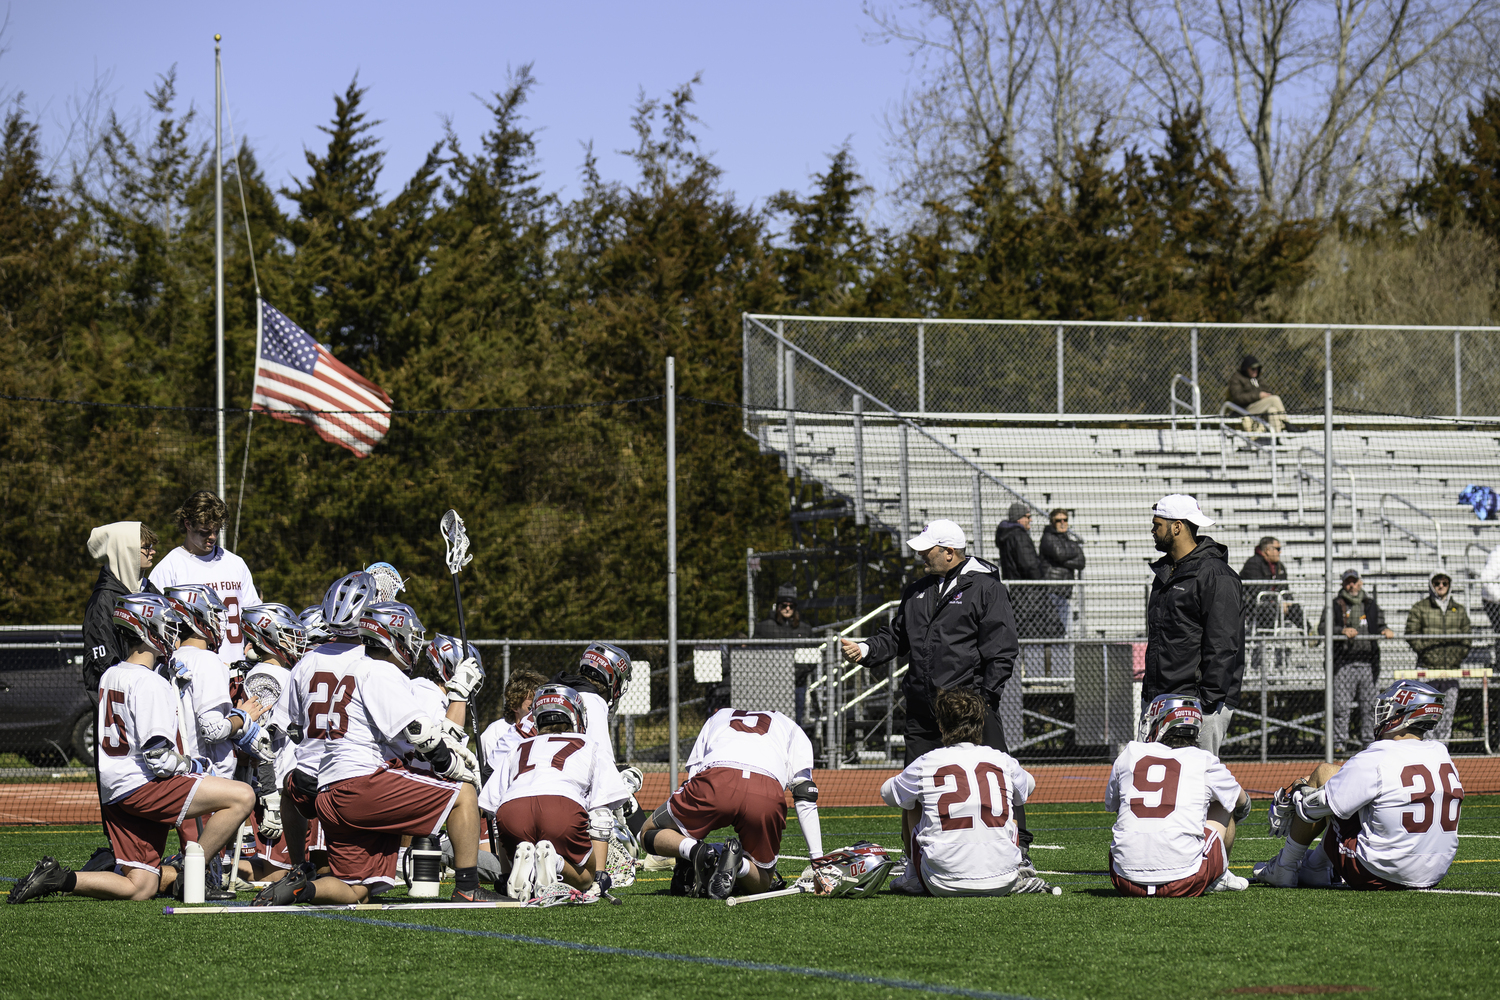 Coaches Matt Babb and Jaron Greenidge speak to their players at halftime, as the American flag in the background is at half mast honoring NYPD police officer Jonathan Diller who was killed last week and was laid to rest on Saturday.   MARIANNE BARNETT